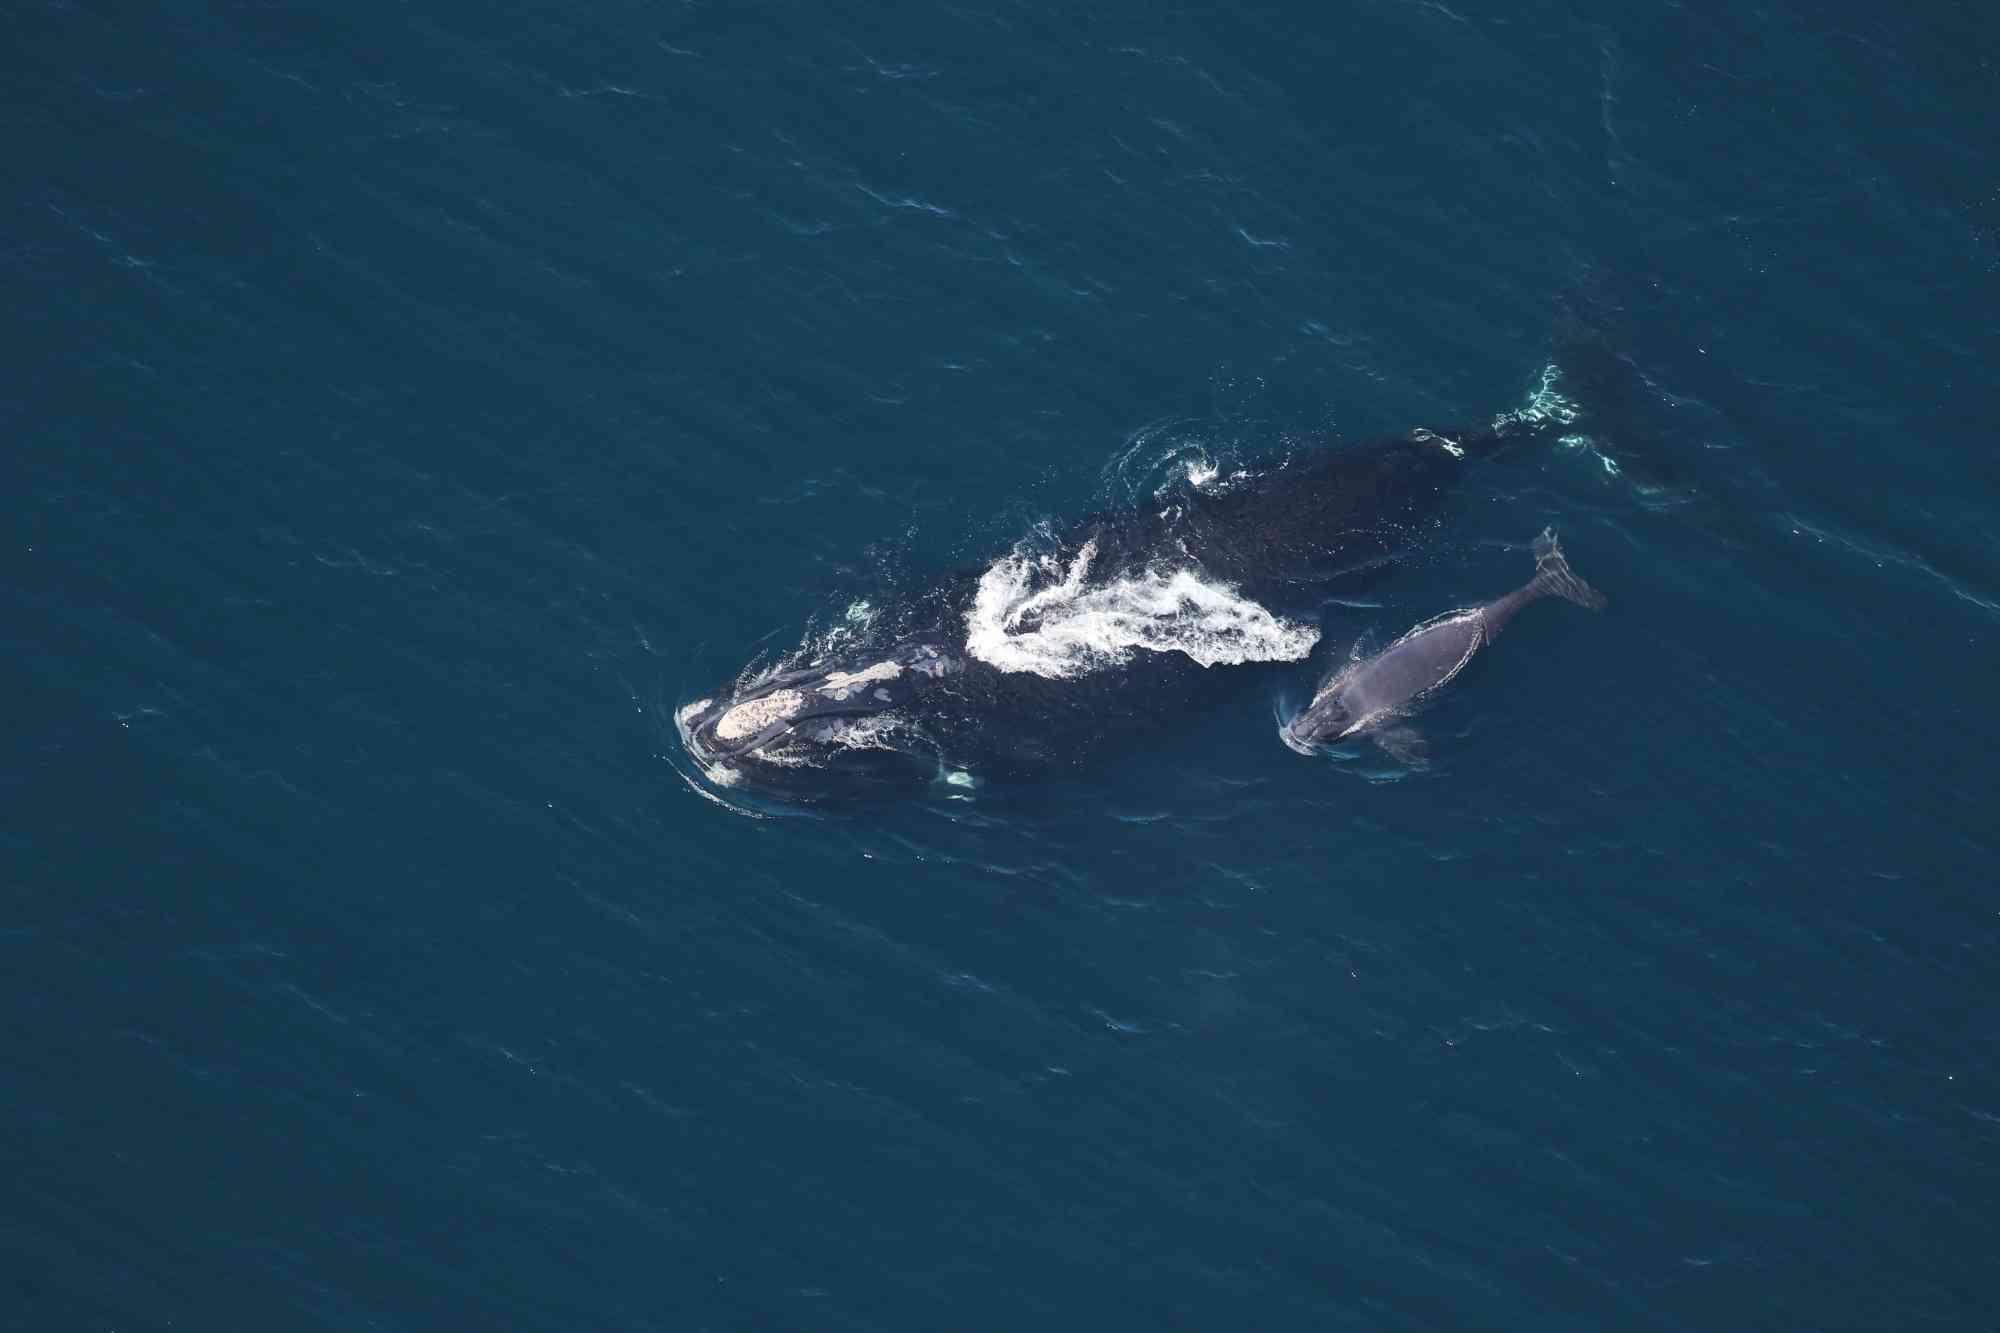 2022.03.03 - North Atlantic Right Whale with Calf - Clearwater Marine Aquarium Research Institute and U.S. Army Corps of Engineers, taken under NOAA permit 20556-01